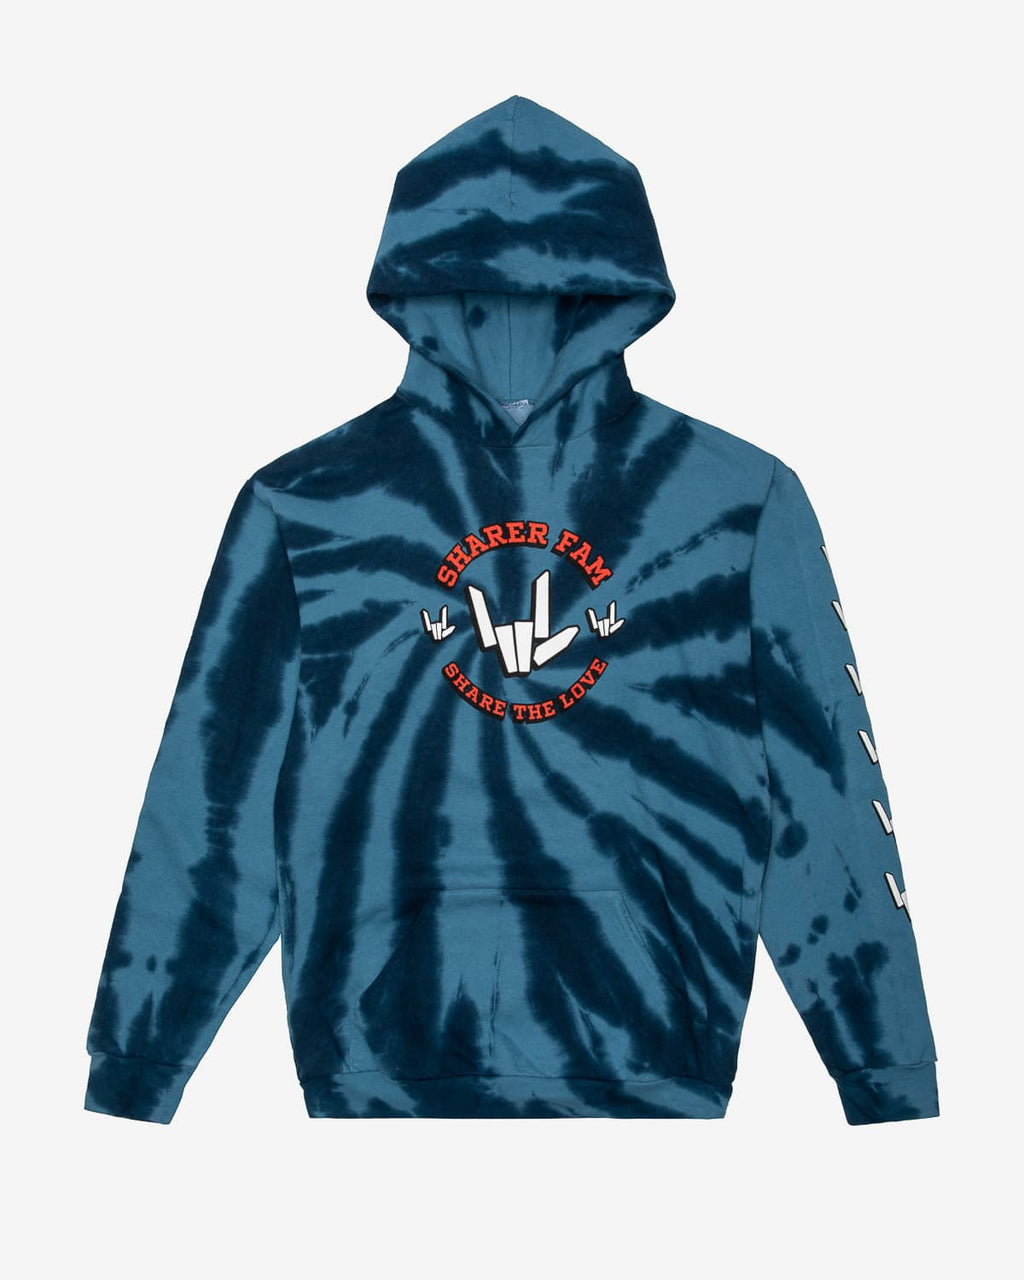 Stephen Sharer 'Sharer Squad' Youth Pullover Hoodie (Blue Tie Dye ...